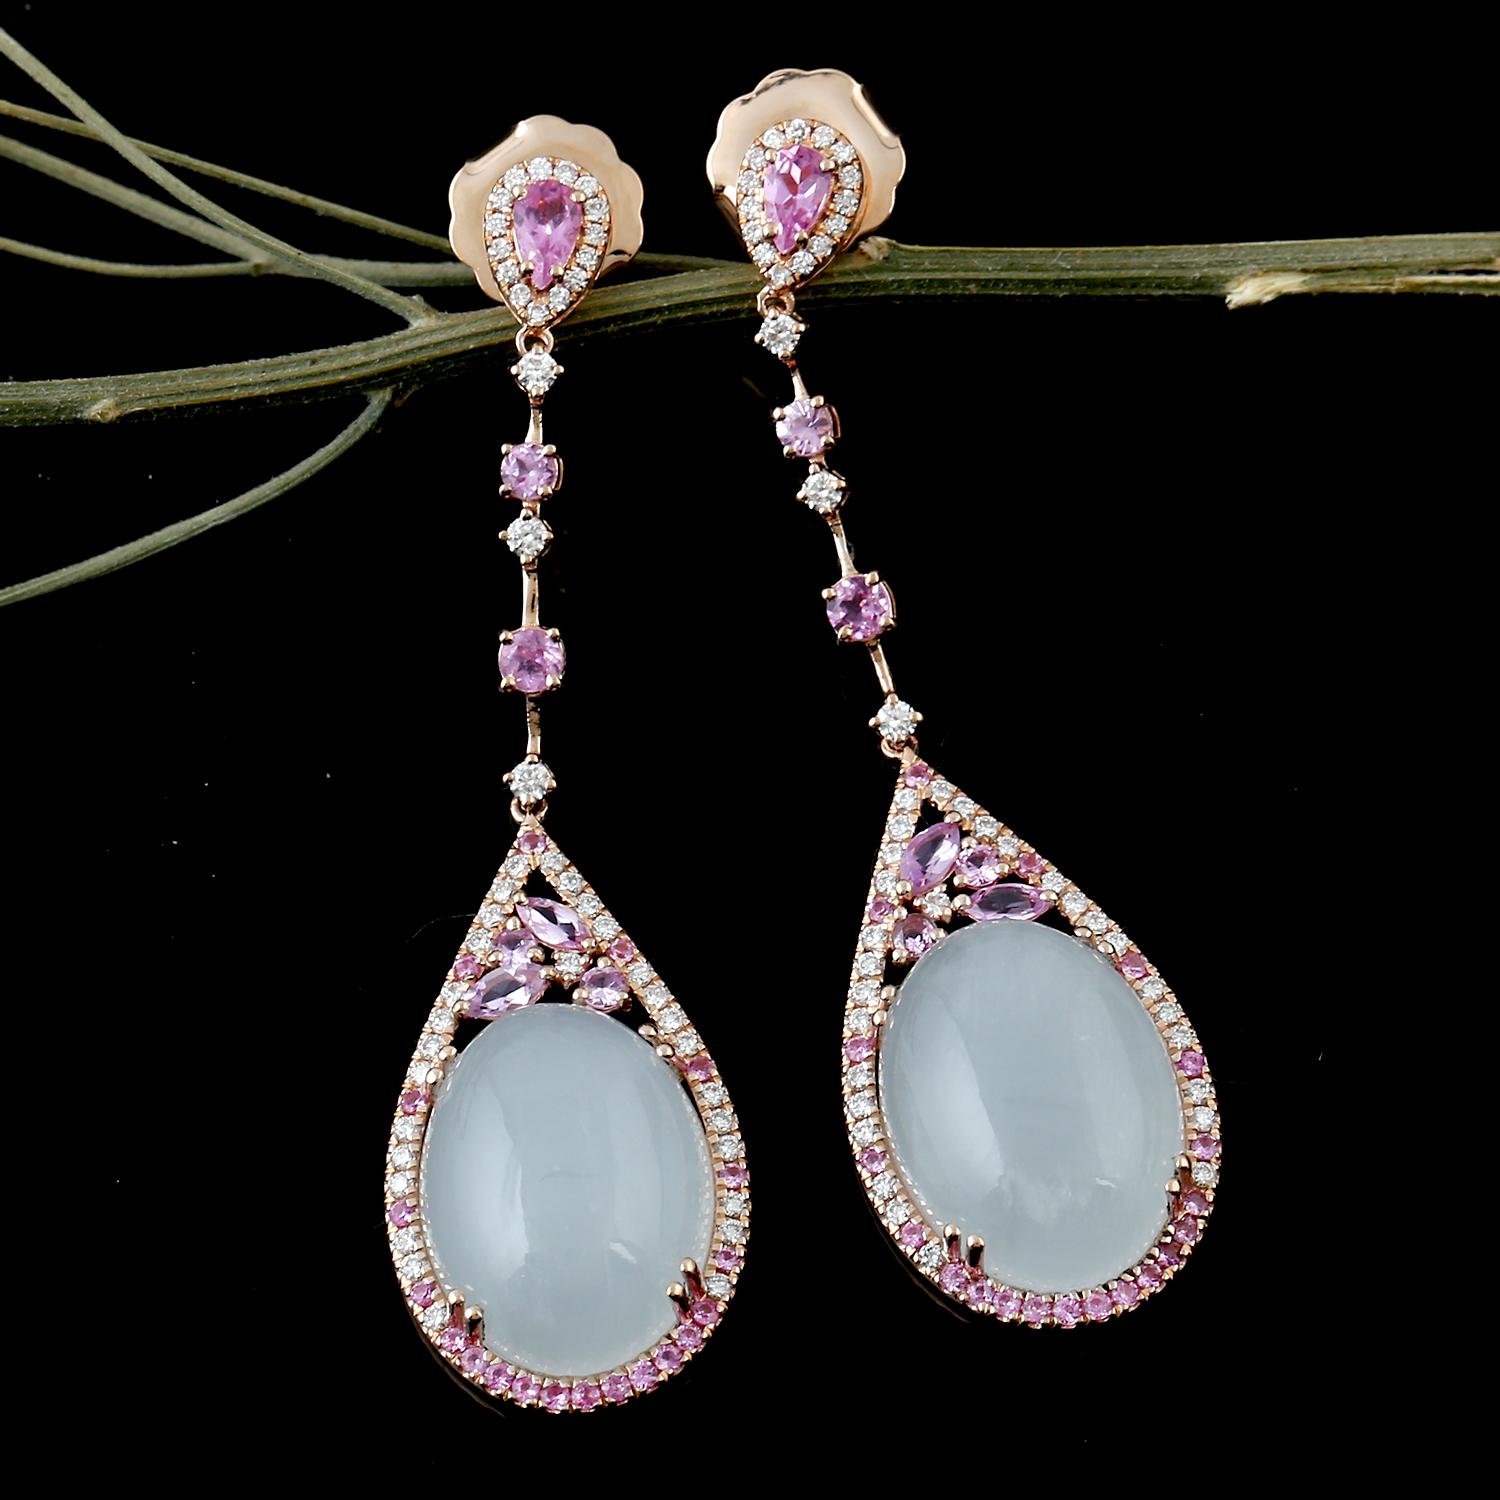 Cast in 14-karat gold, these beautiful earrings are hand set with 25.47 carats of Aquamarine, 1.96 carat Pink Sapphire and .81 carats of sparkling diamonds. 

FOLLOW  MEGHNA JEWELS storefront to view the latest collection & exclusive pieces.  Meghna